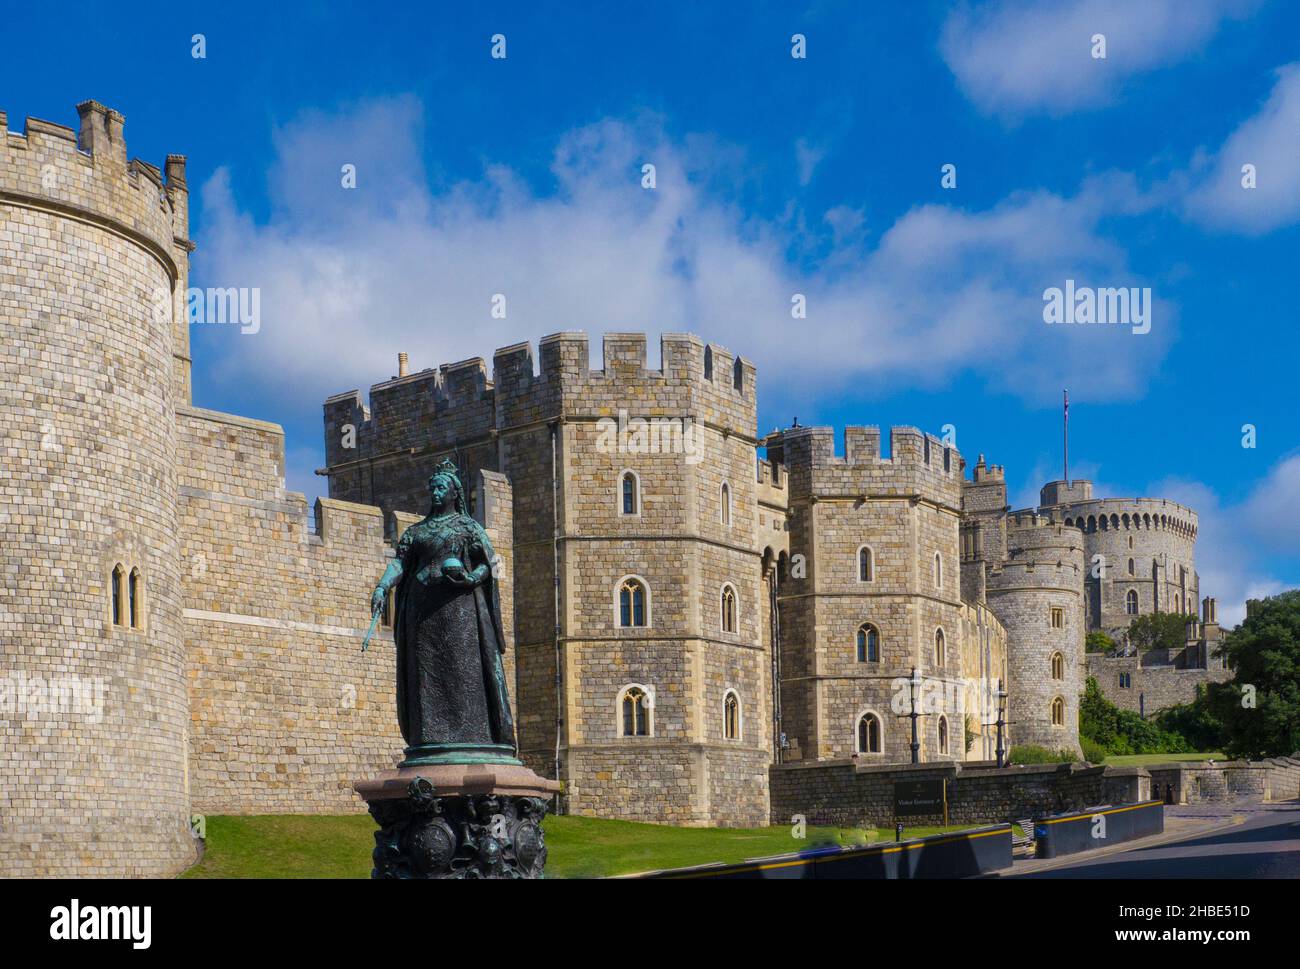 Windsor Castle and Queen Victoria statue.Windsor ,Berkshire, England .Windsor Castle is the oldest and largest occupied castle in the world. Founded b Stock Photo